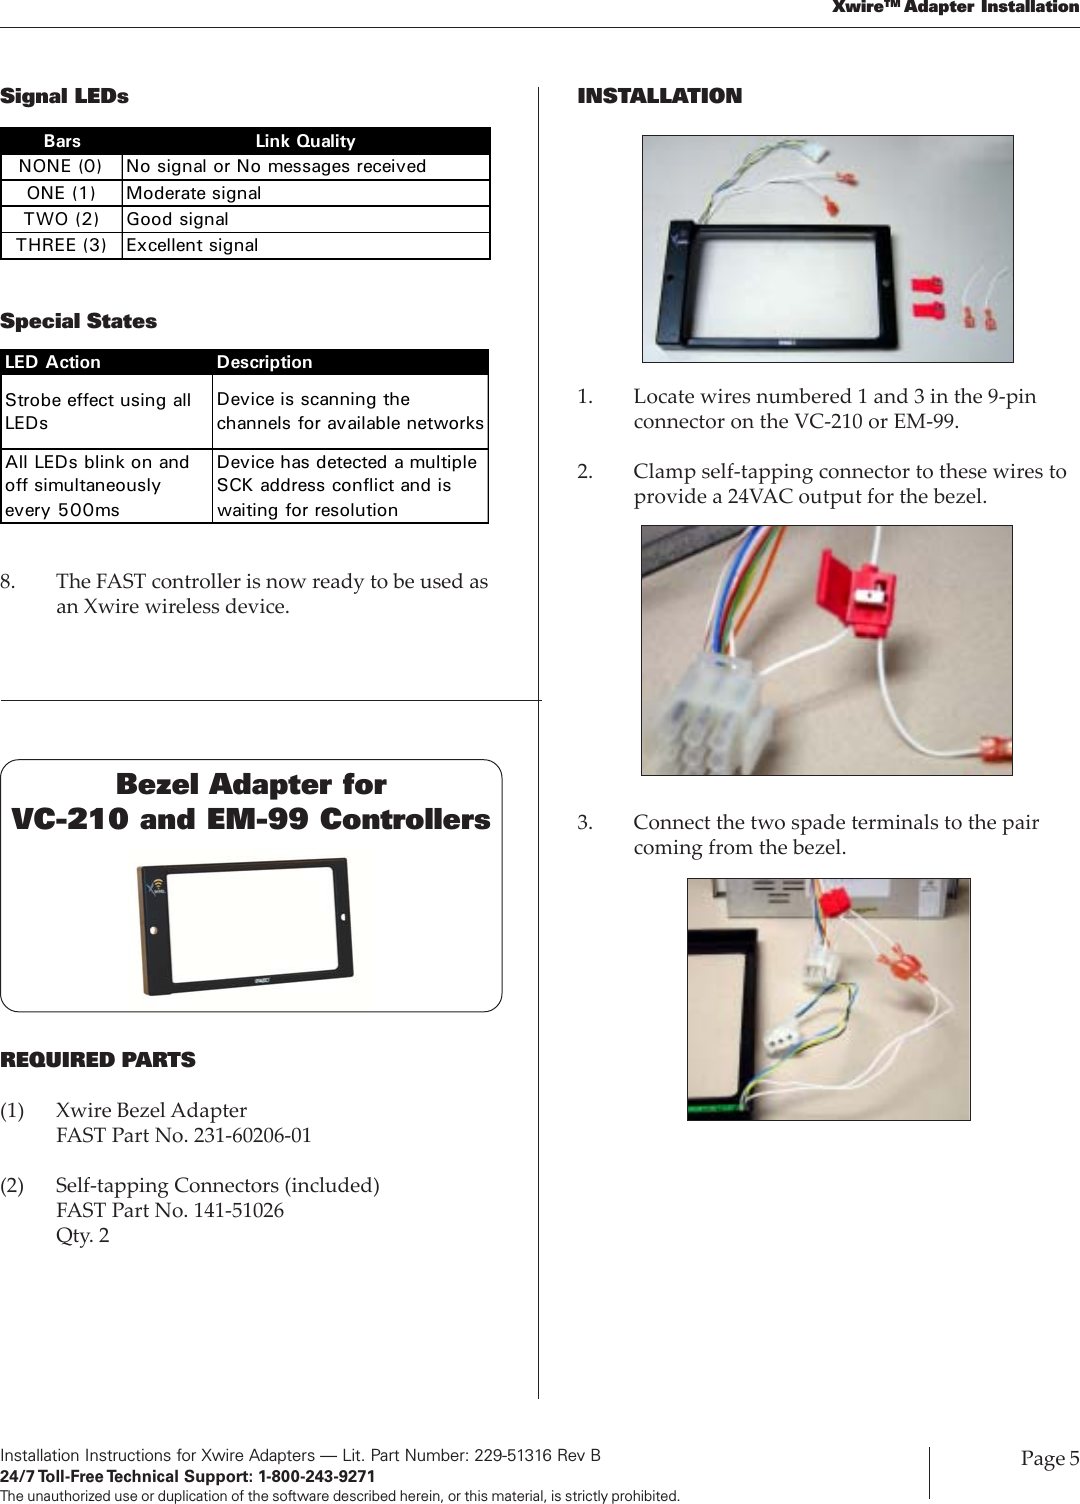 Installation Instructions for Xwire Adapters — Lit. Part Number: 229-51316 Rev B24/7 Toll-Free Technical  Support:  1-800-243-9271The unauthorized use or duplication of the software described herein, or this material, is strictly prohibited.Page 5XwireTM Adapter InstallationSignal LEDsSpecial StatesBars Link QualityNONE (0) No signal or No messages receivedONE (1) Moderate signalTWO (2) Good signalTHREE (3) Excellent signalLED Action DescriptionStrobe effect using all LEDsDevice is scanning the channels for available networksAll LEDs blink on and off simultaneously every 500msDevice has detected a multiple SCK address conflict and is waiting for resolution8. The FAST controller is now ready to be used asan Xwire wireless device.Bezel Adapter forVC-210 and EM-99 ControllersREQUIRED PARTS(1) Xwire Bezel AdapterFAST Part No. 231-60206-01(2) Self-tapping Connectors (included)FAST Part No. 141-51026Qty. 2INSTALLATION1. Locate wires numbered 1 and 3 in the 9-pinconnector on the VC-210 or EM-99.2. Clamp self-tapping connector to these wires toprovide a 24VAC output for the bezel.3. Connect the two spade terminals to the paircoming from the bezel.